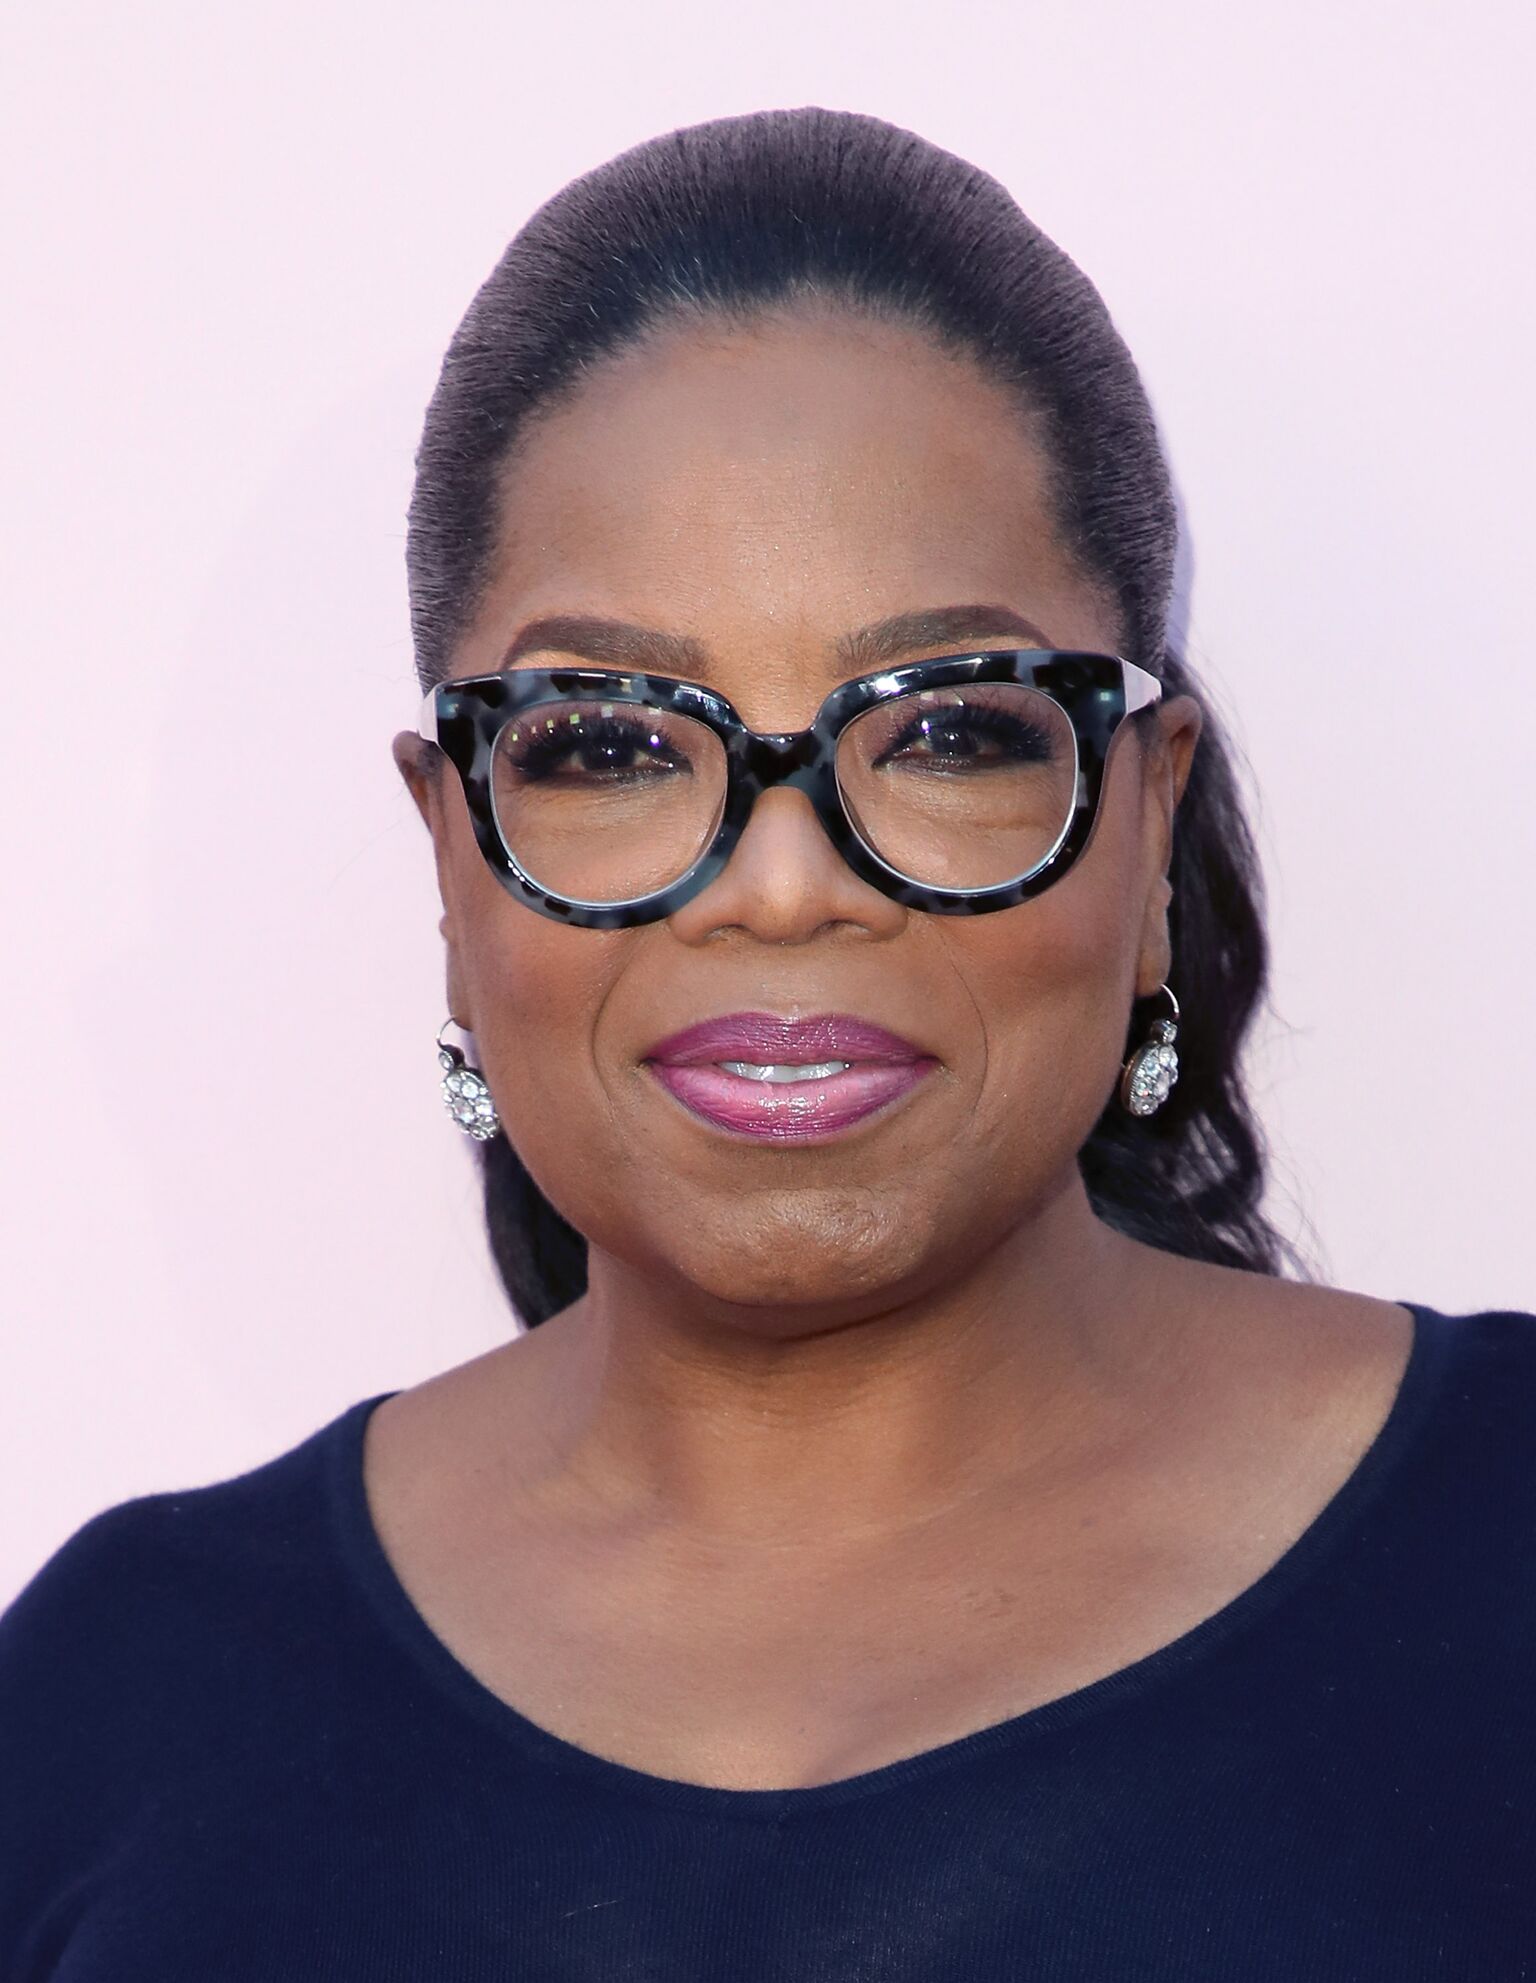 Actress Oprah Winfrey attends the premiere of OWN's "Love Is_" at NeueHouse Hollywood on June 11, 2018 | Photo: Getty Images